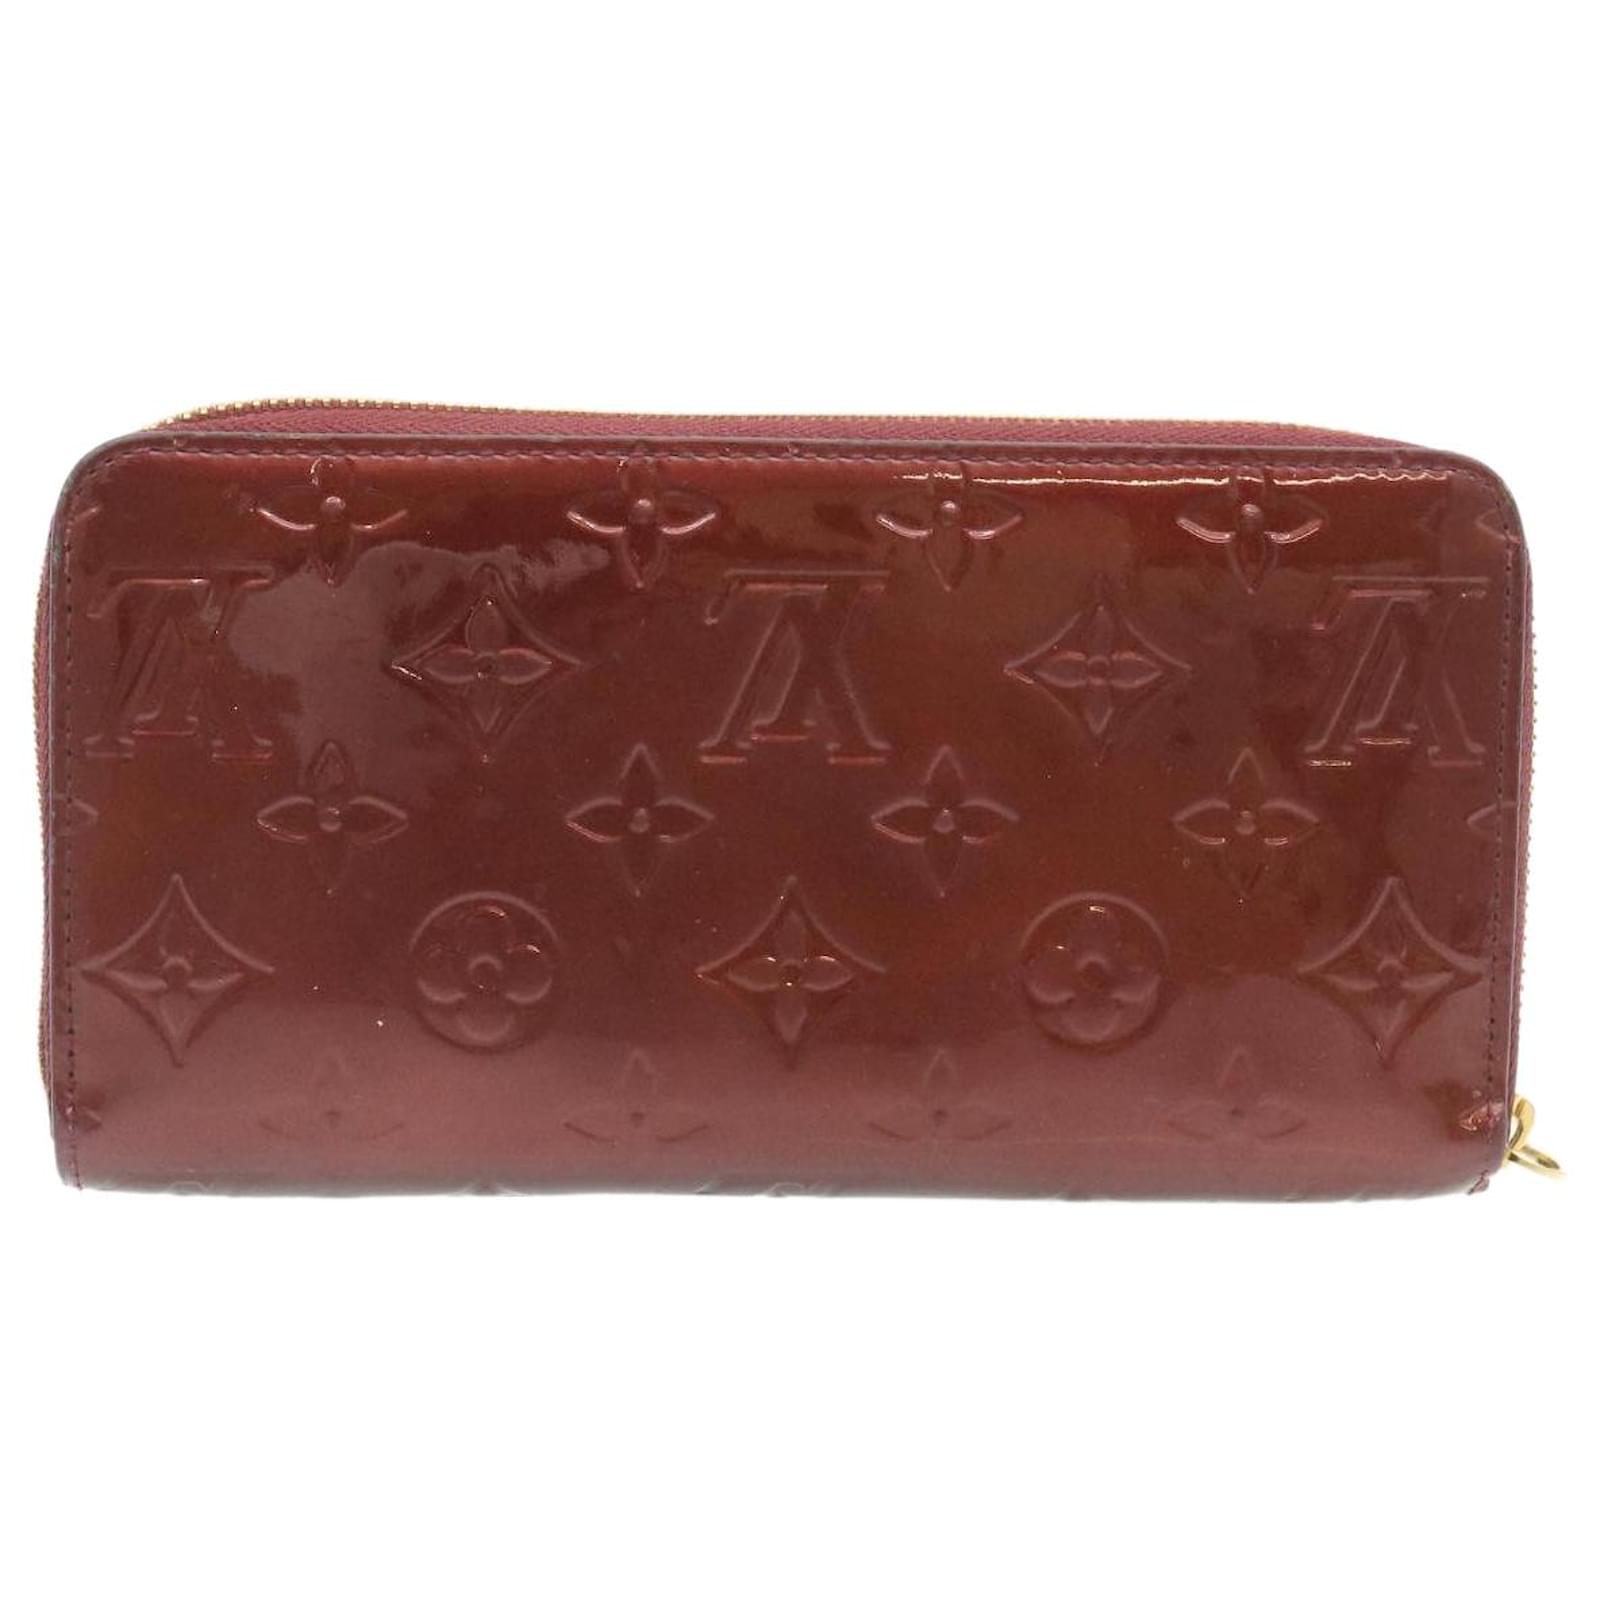 Louis Vuitton Zippy Wallet Womens Long Wallets, Red, (Inventory Confirmation Required)